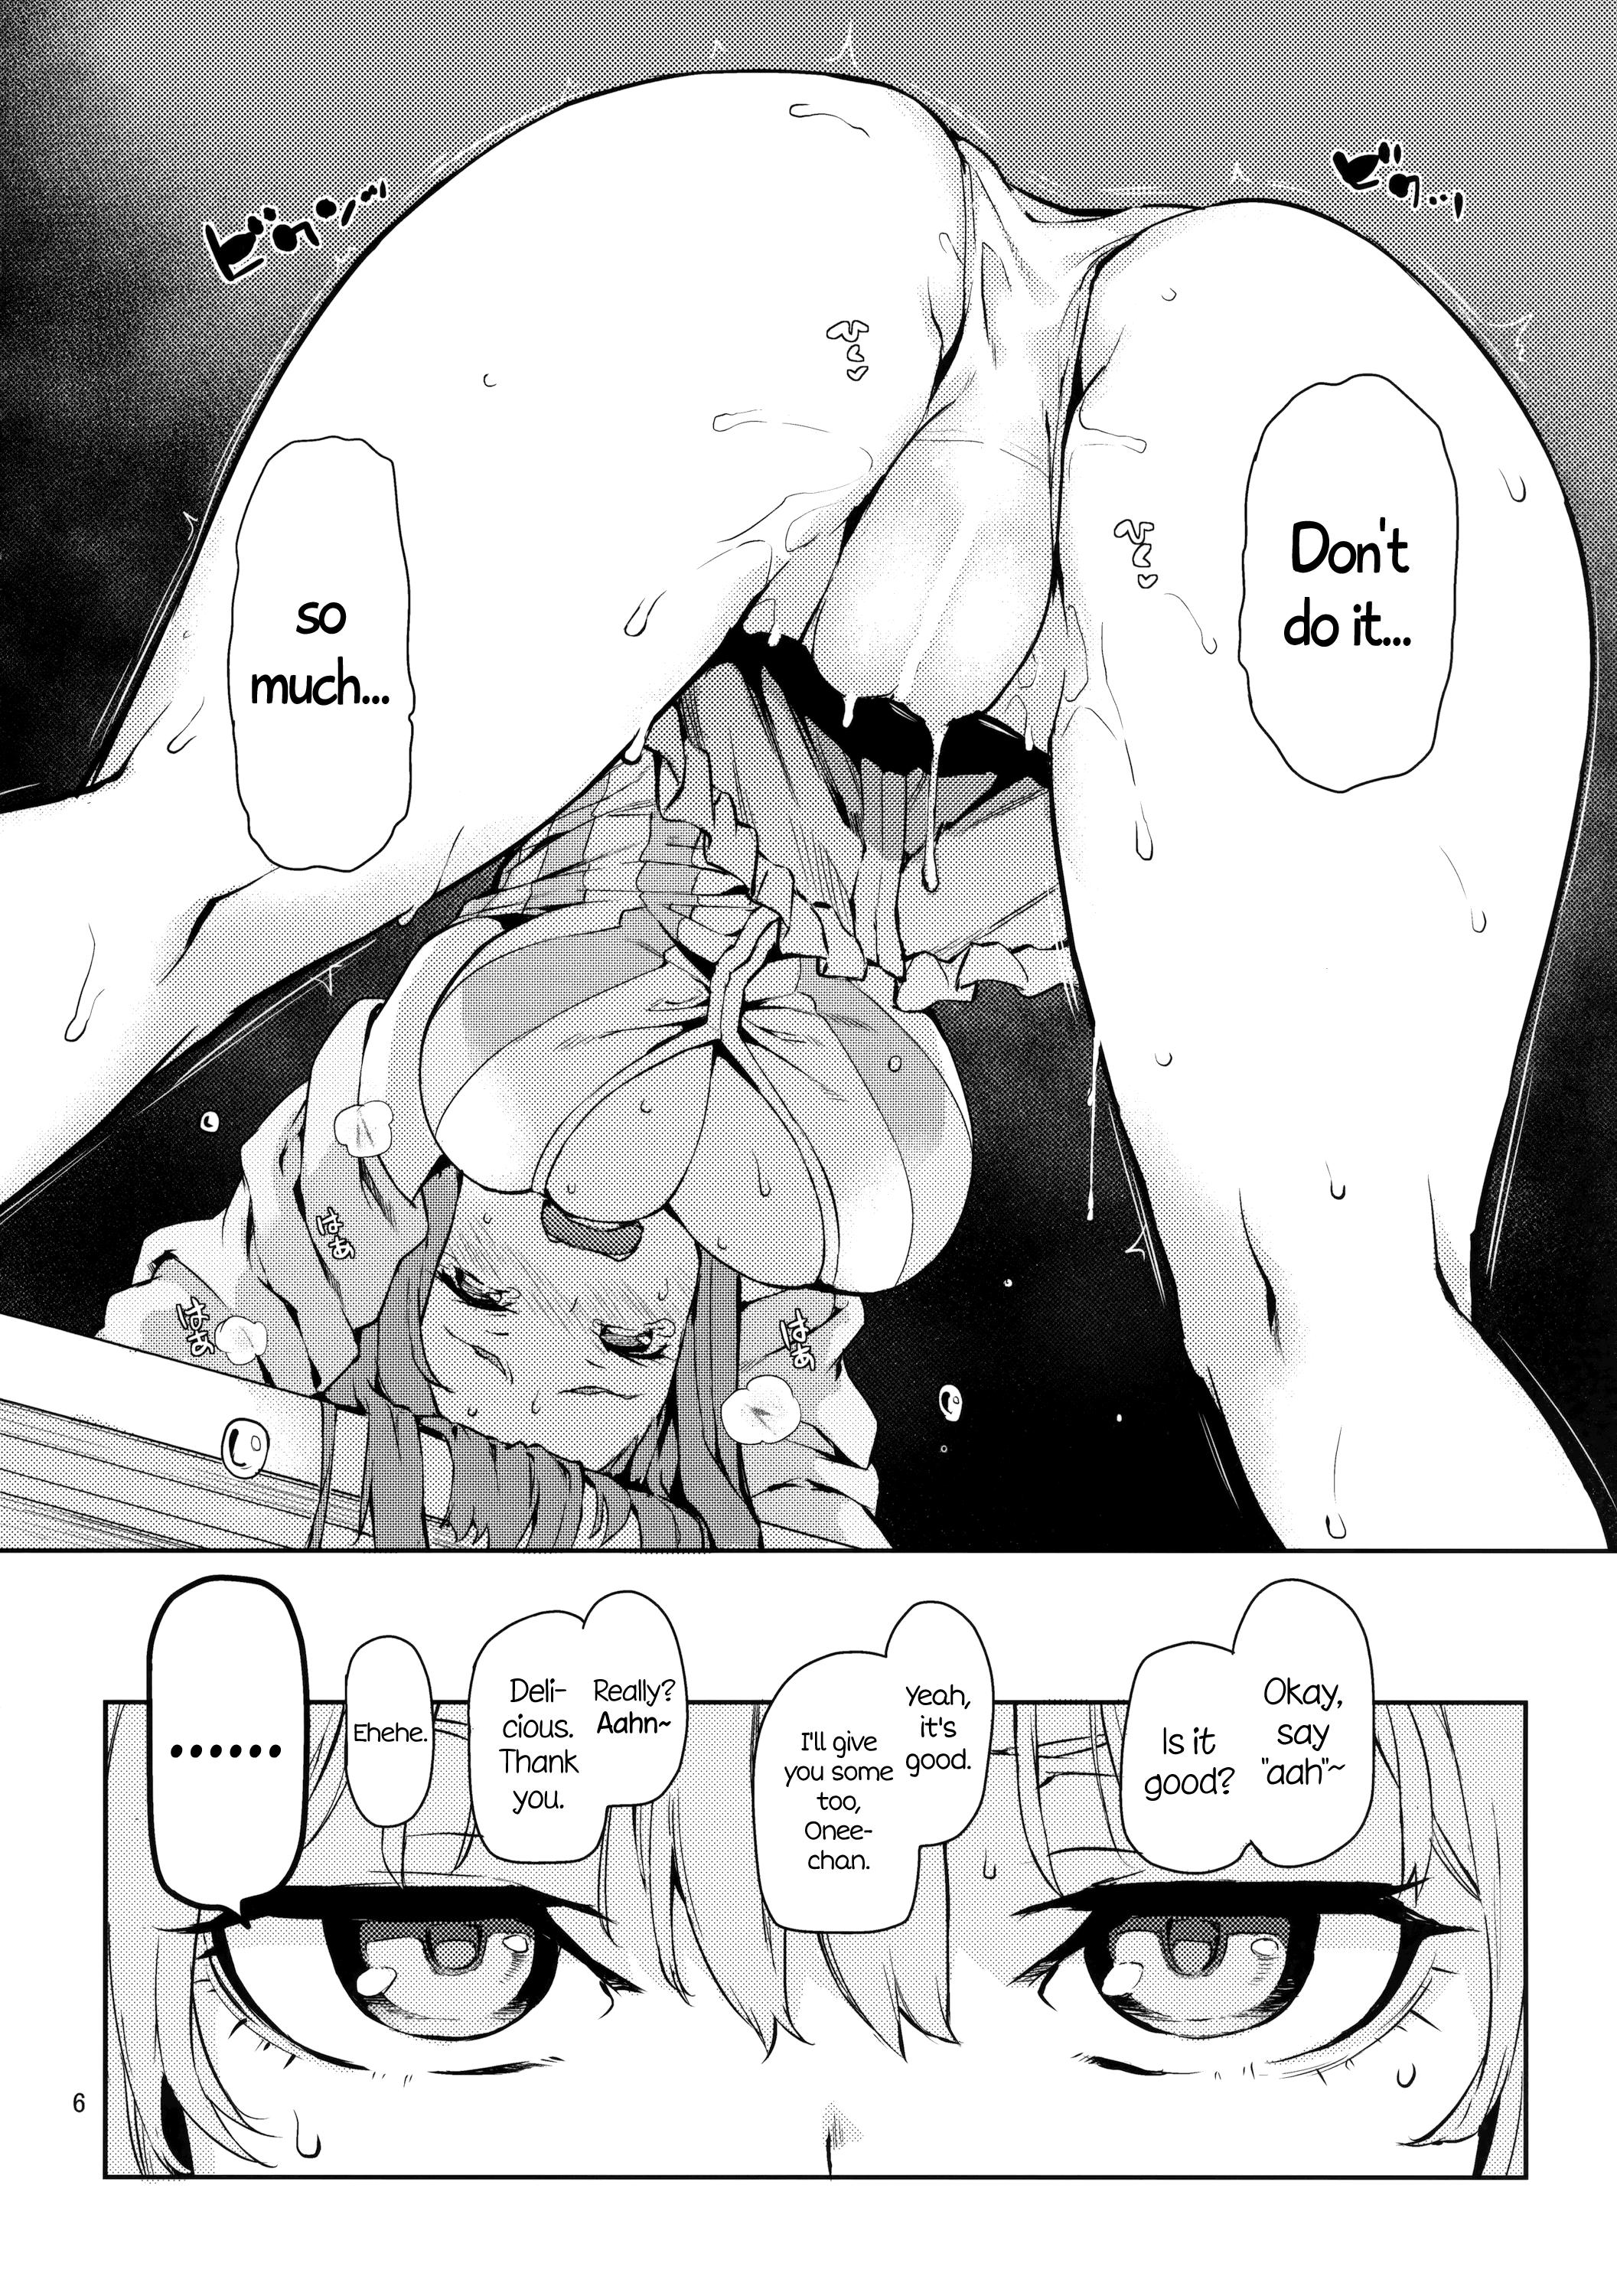 Girls Getting Fucked (Reitaisai 13) [Anmitsuyomogitei (Michiking)] Osewa Shinaide Flan Onee-chan! | Don't Take Care Of Me, Flan Onee-chan! (Touhou Project) [English] =Facedesk + CW= - Touhou project Fuck For Cash - Page 6